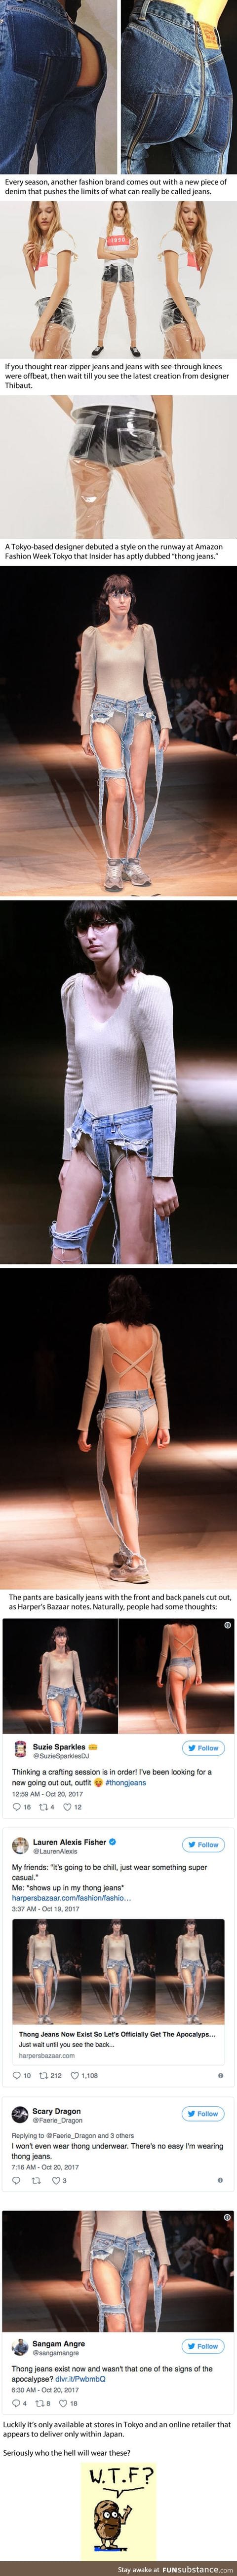 High-fashion 'thong jeans' are the latest trend but it is quite confusing